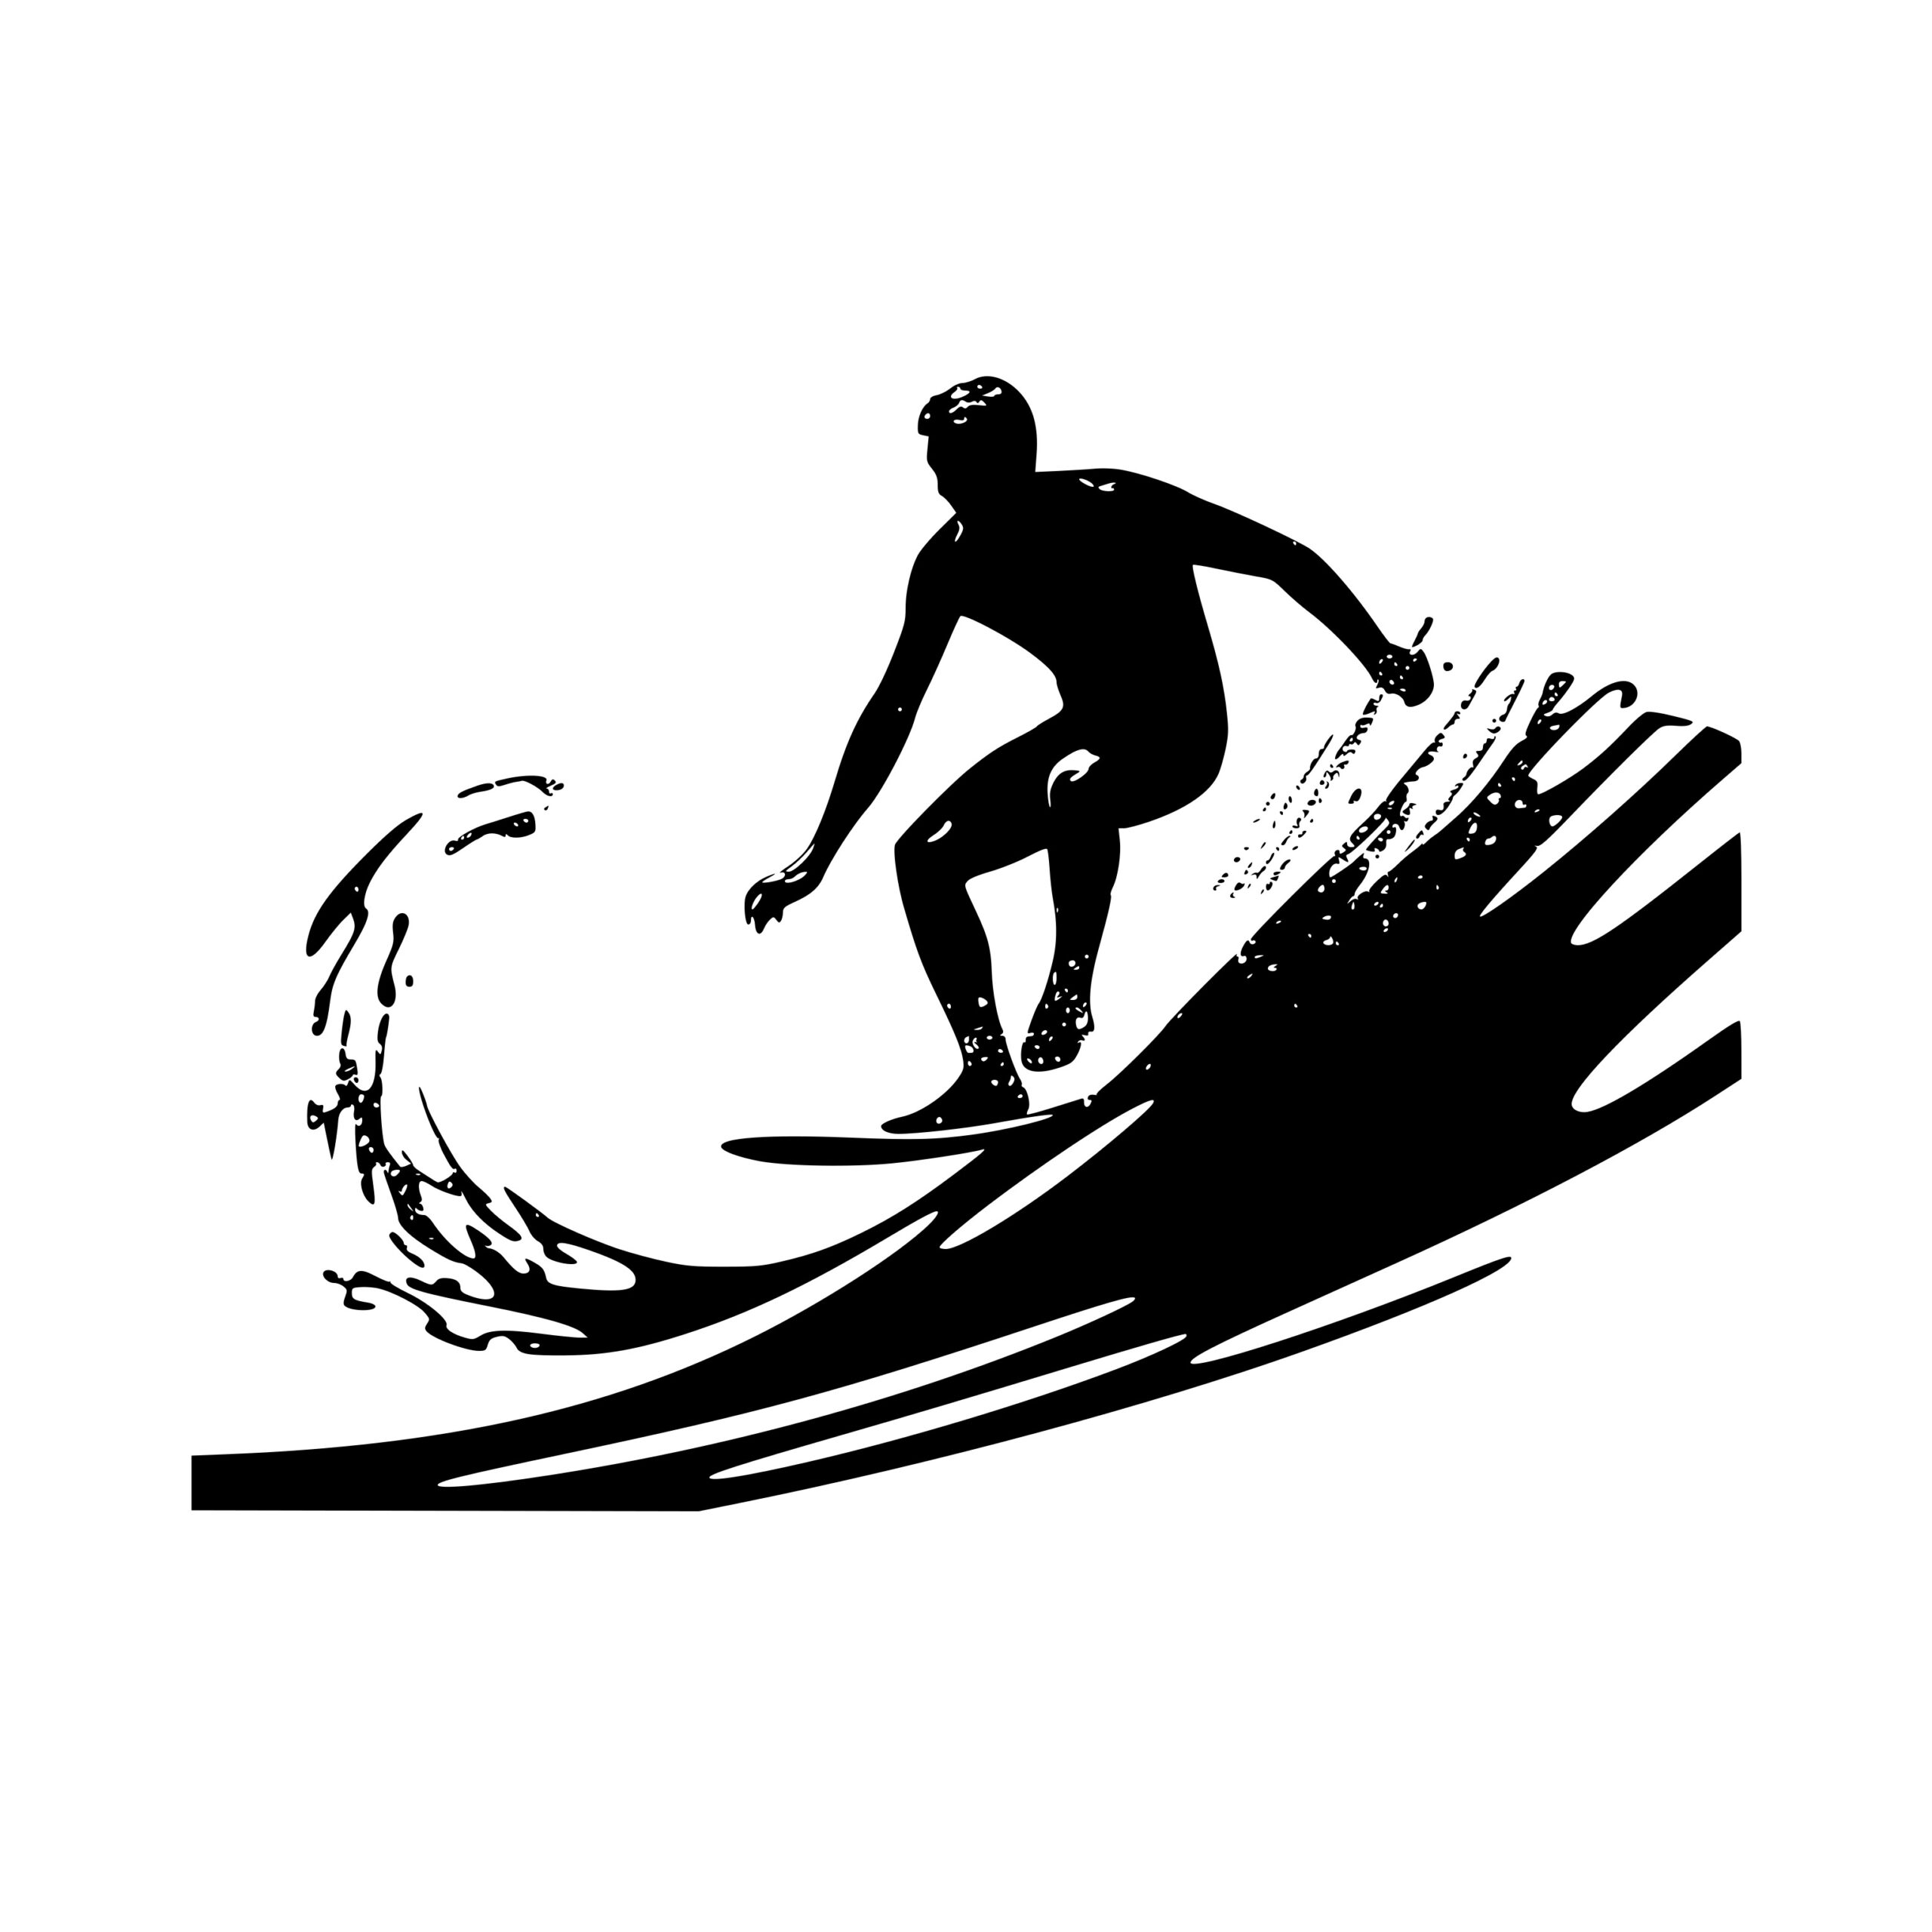 Surfing Waves SVG Image: Instant Download for Cricut, Silhouette